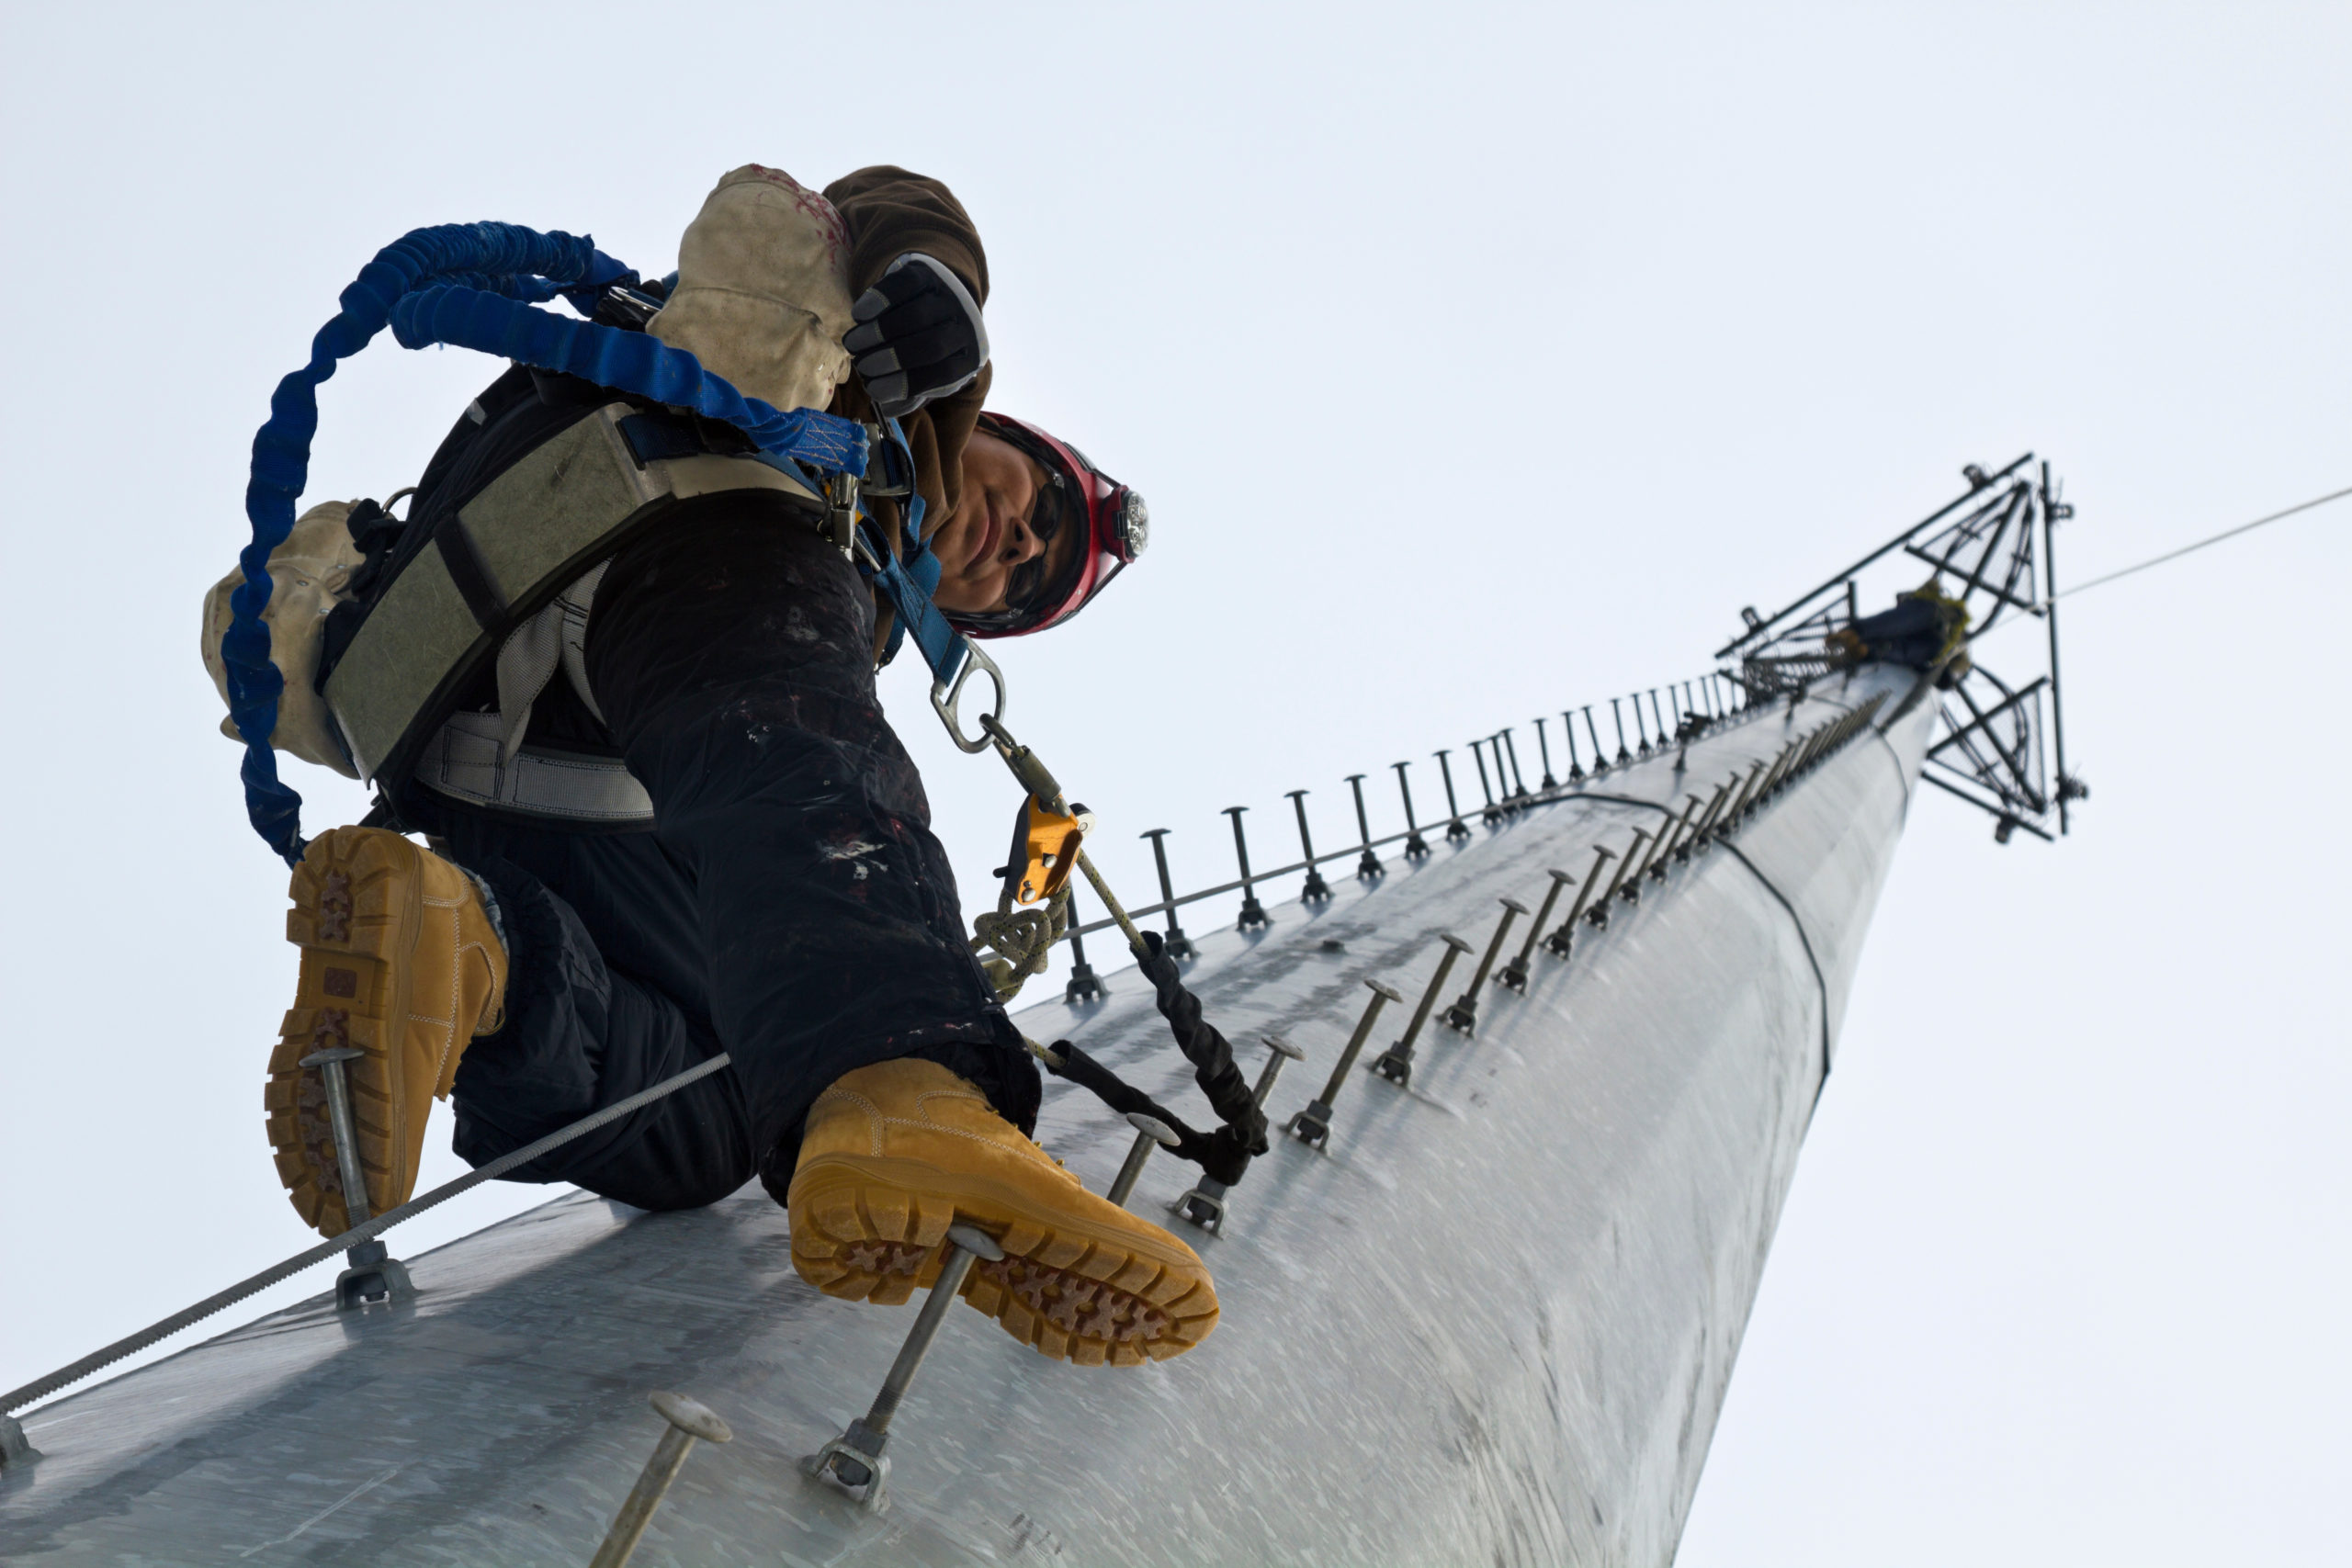 A man ascending a cell tower for work.